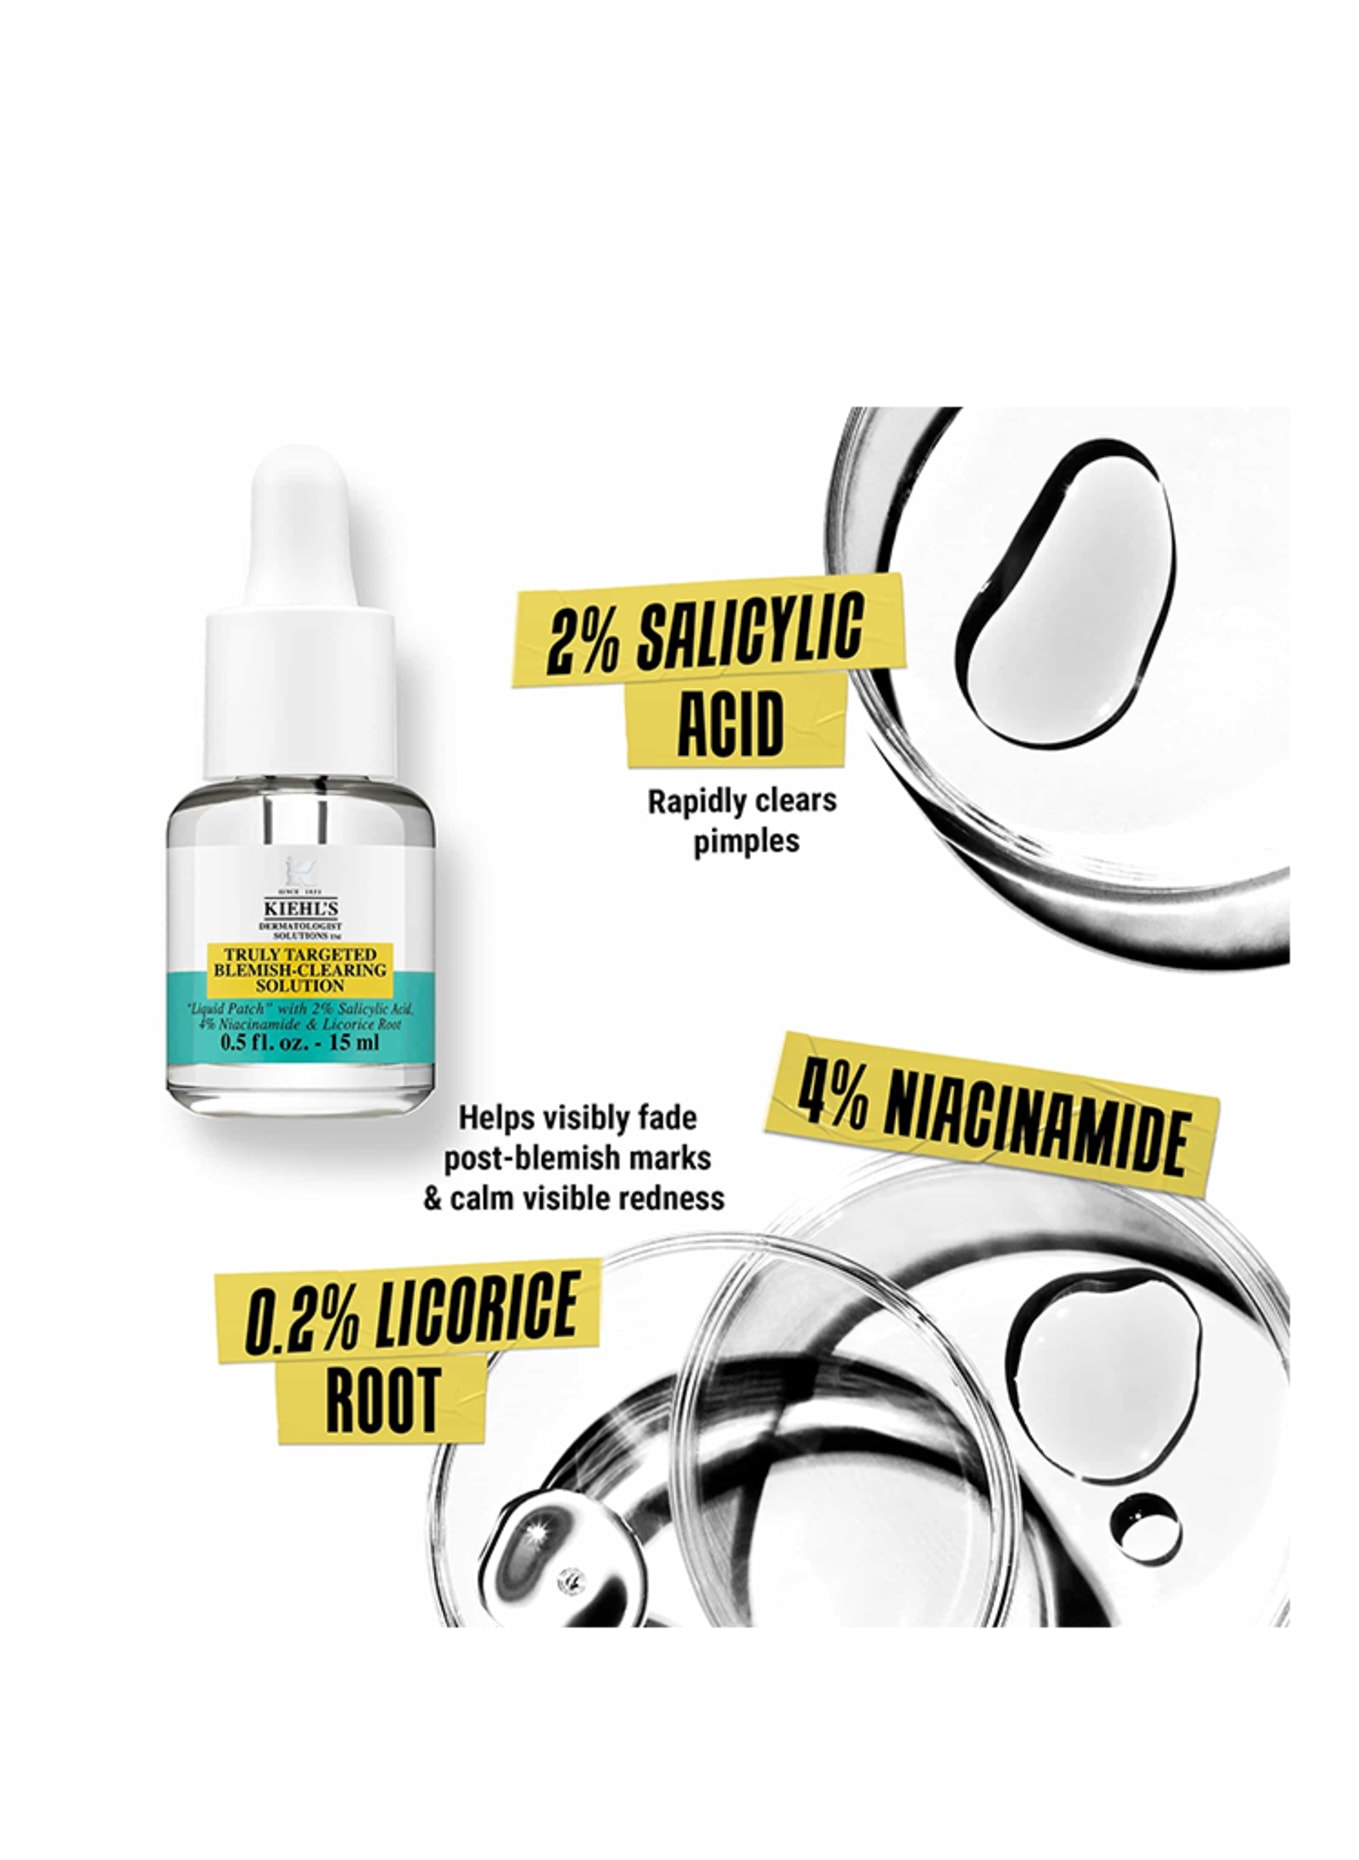 Kiehl's TRULY TARGETED BLEMISH CLEARING SOLUTION (Obrazek 4)